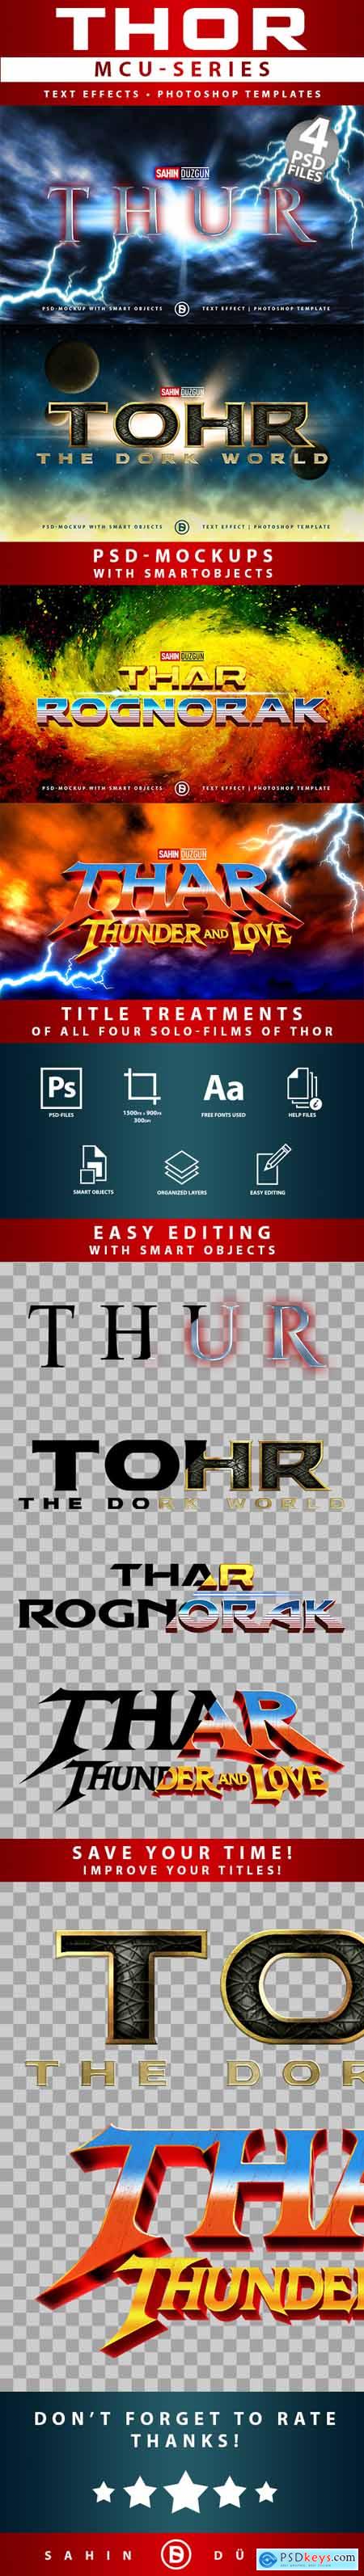 THOR - MCU-Film Series - Text-Effects-Mockups - Template-Package 26728529